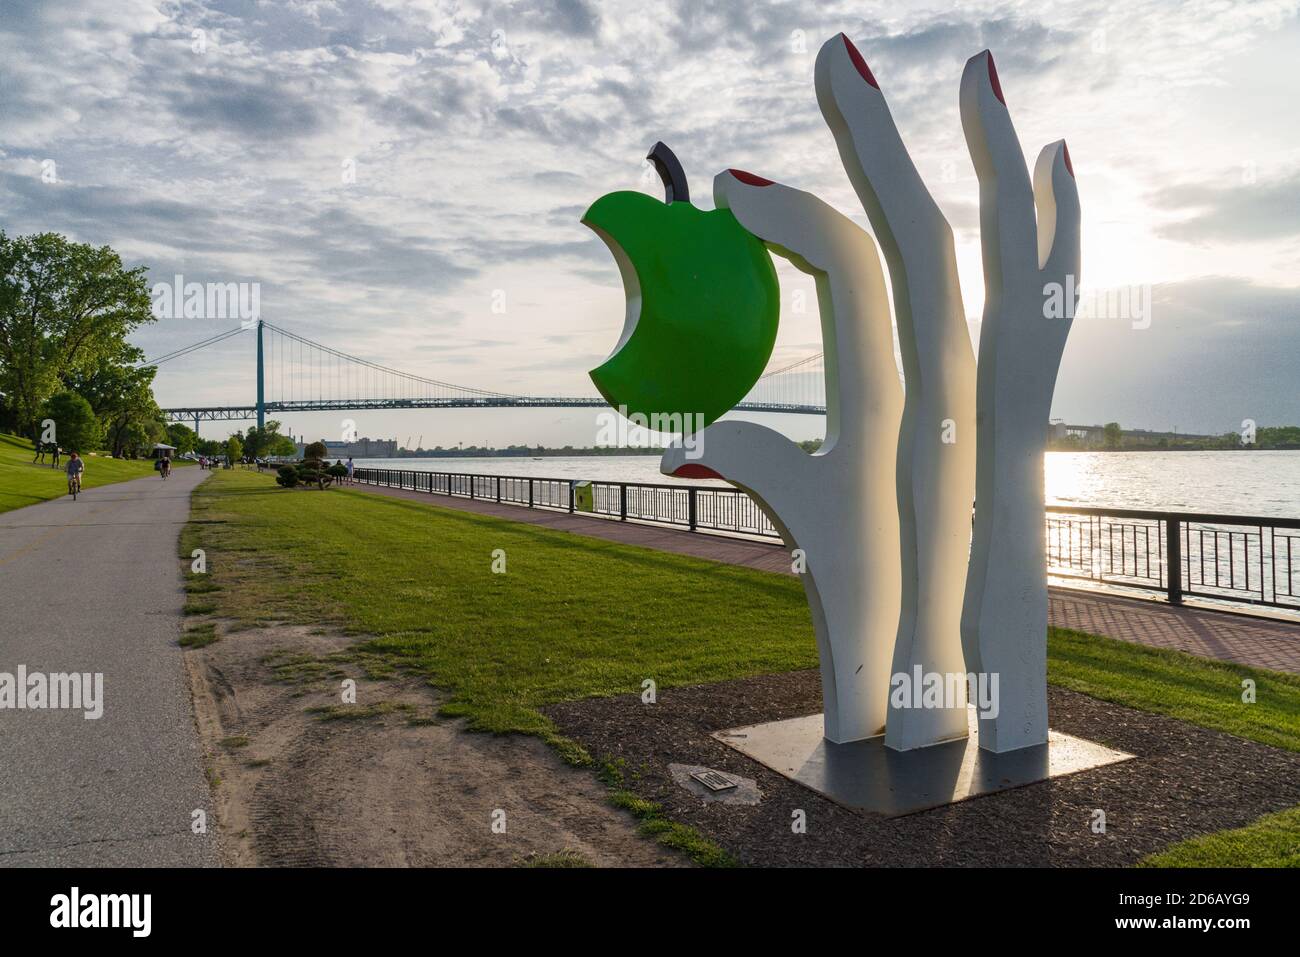 Sculpture along the river side of Windsor ontario. Stock Photo